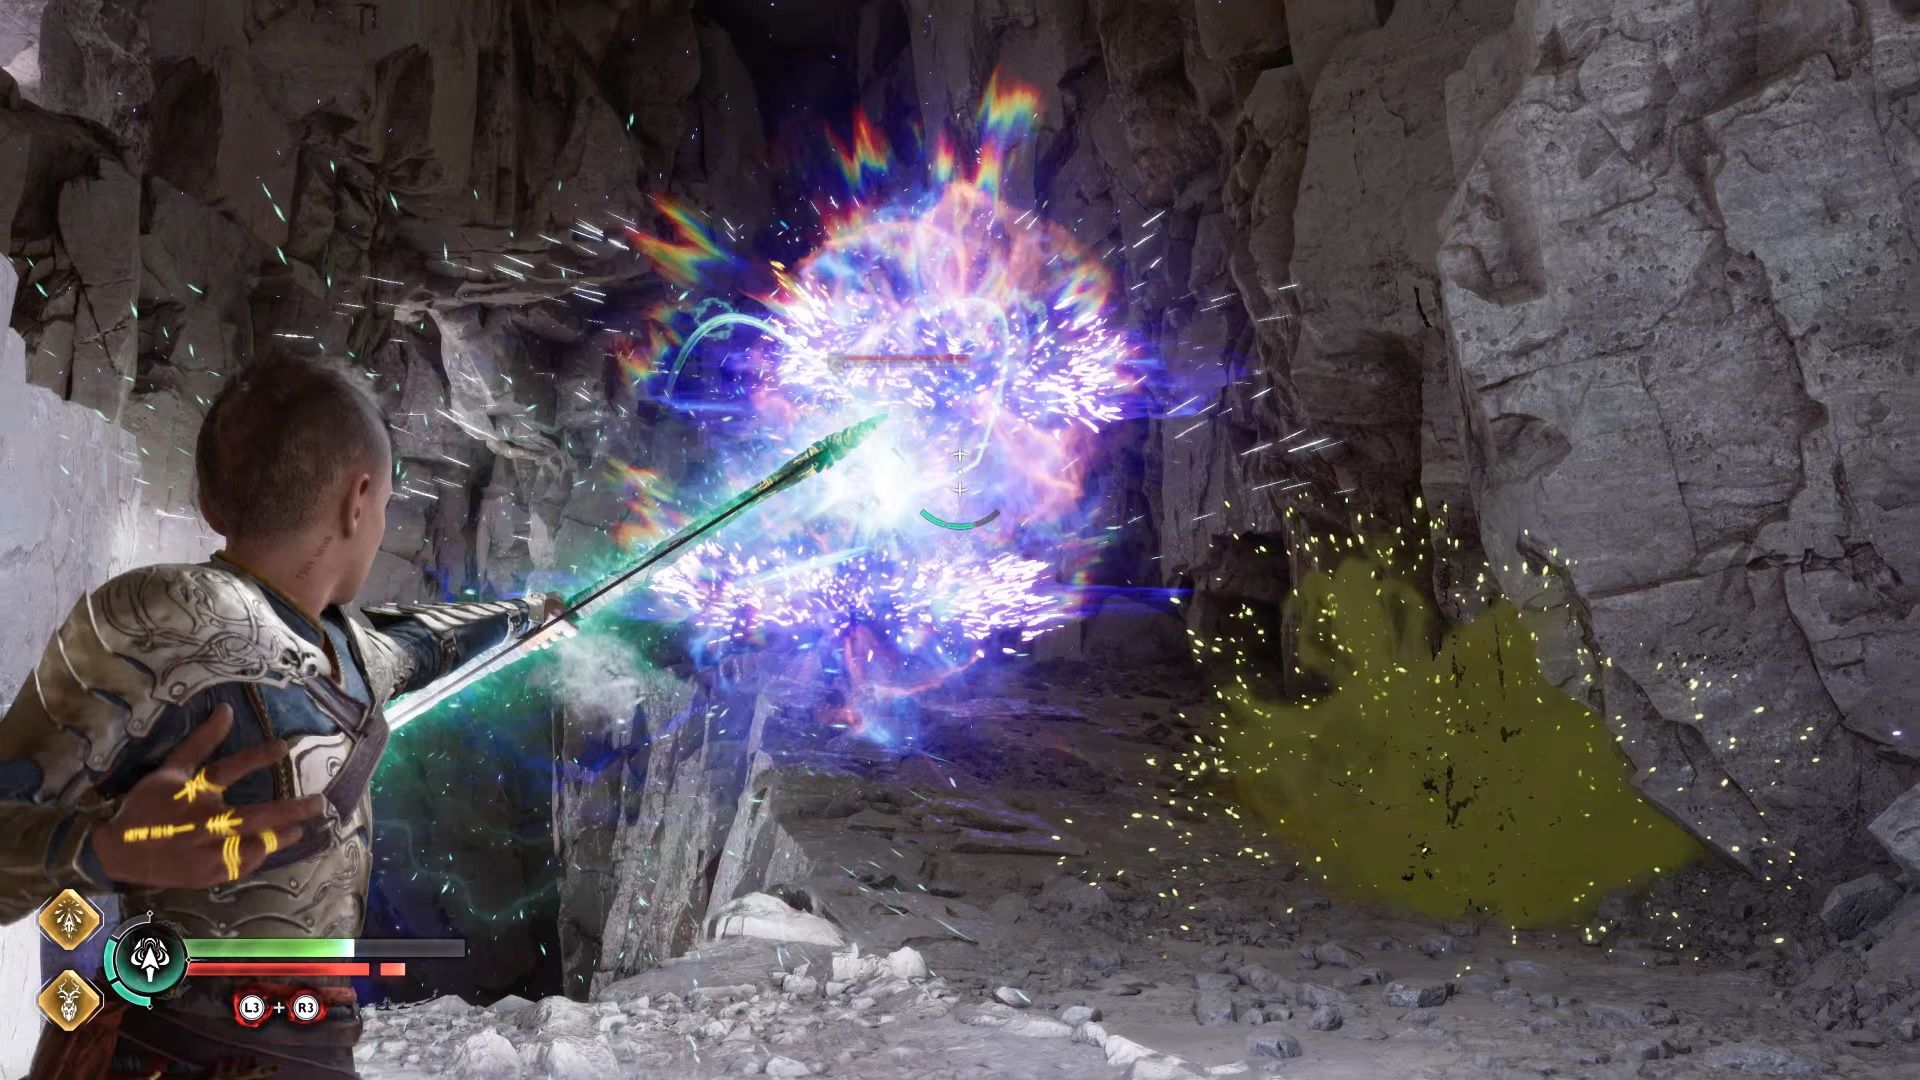 God of War Ragnarok, The Runaway, Causing A Huge Wisp-based Explosion In The Cave